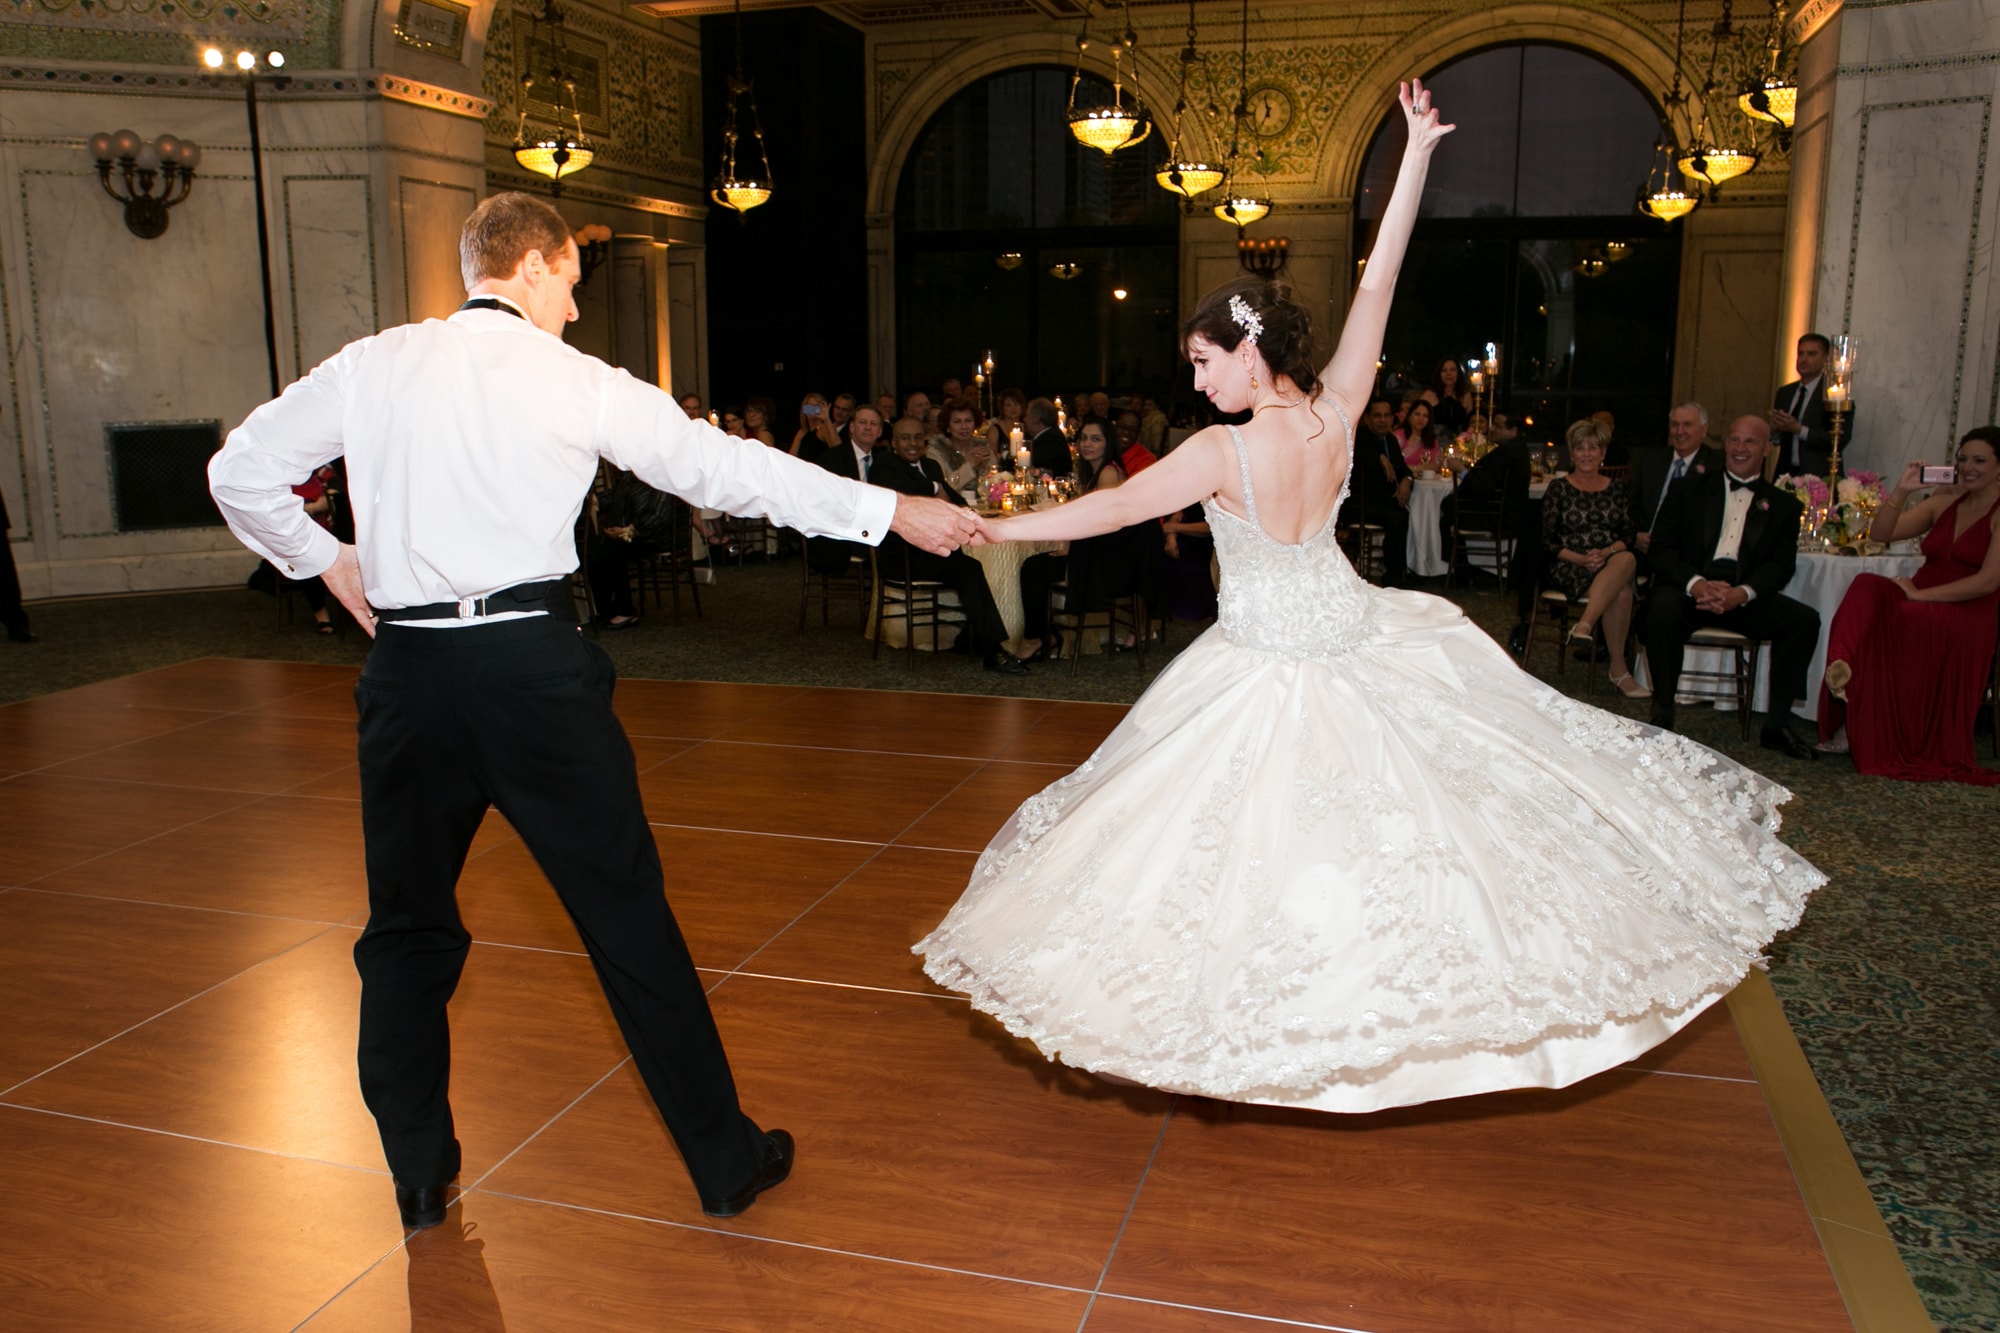 Dramatic first dance at Chicago Cultural Center wedding reception